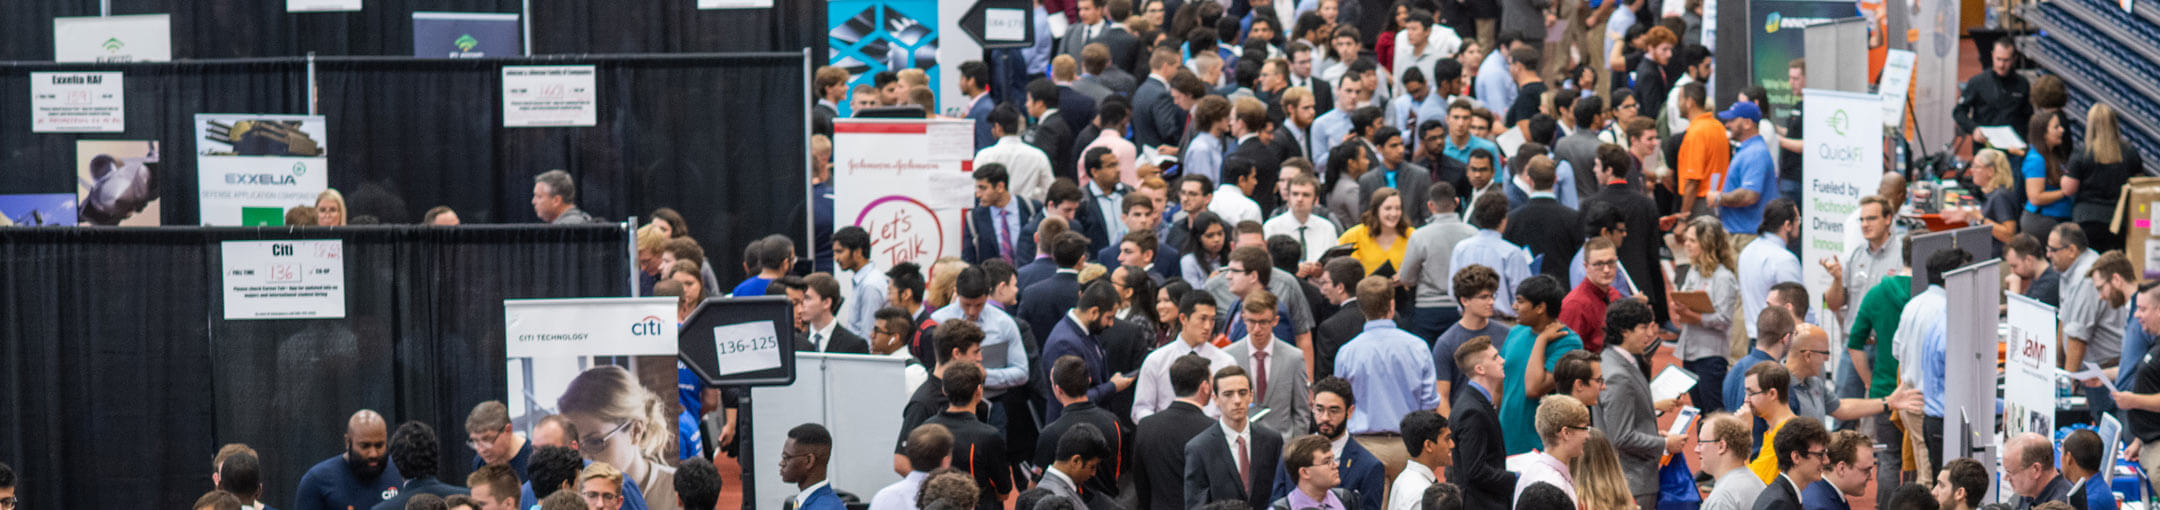 An aerial view of RIT students at the booths of various companies during a career fair.